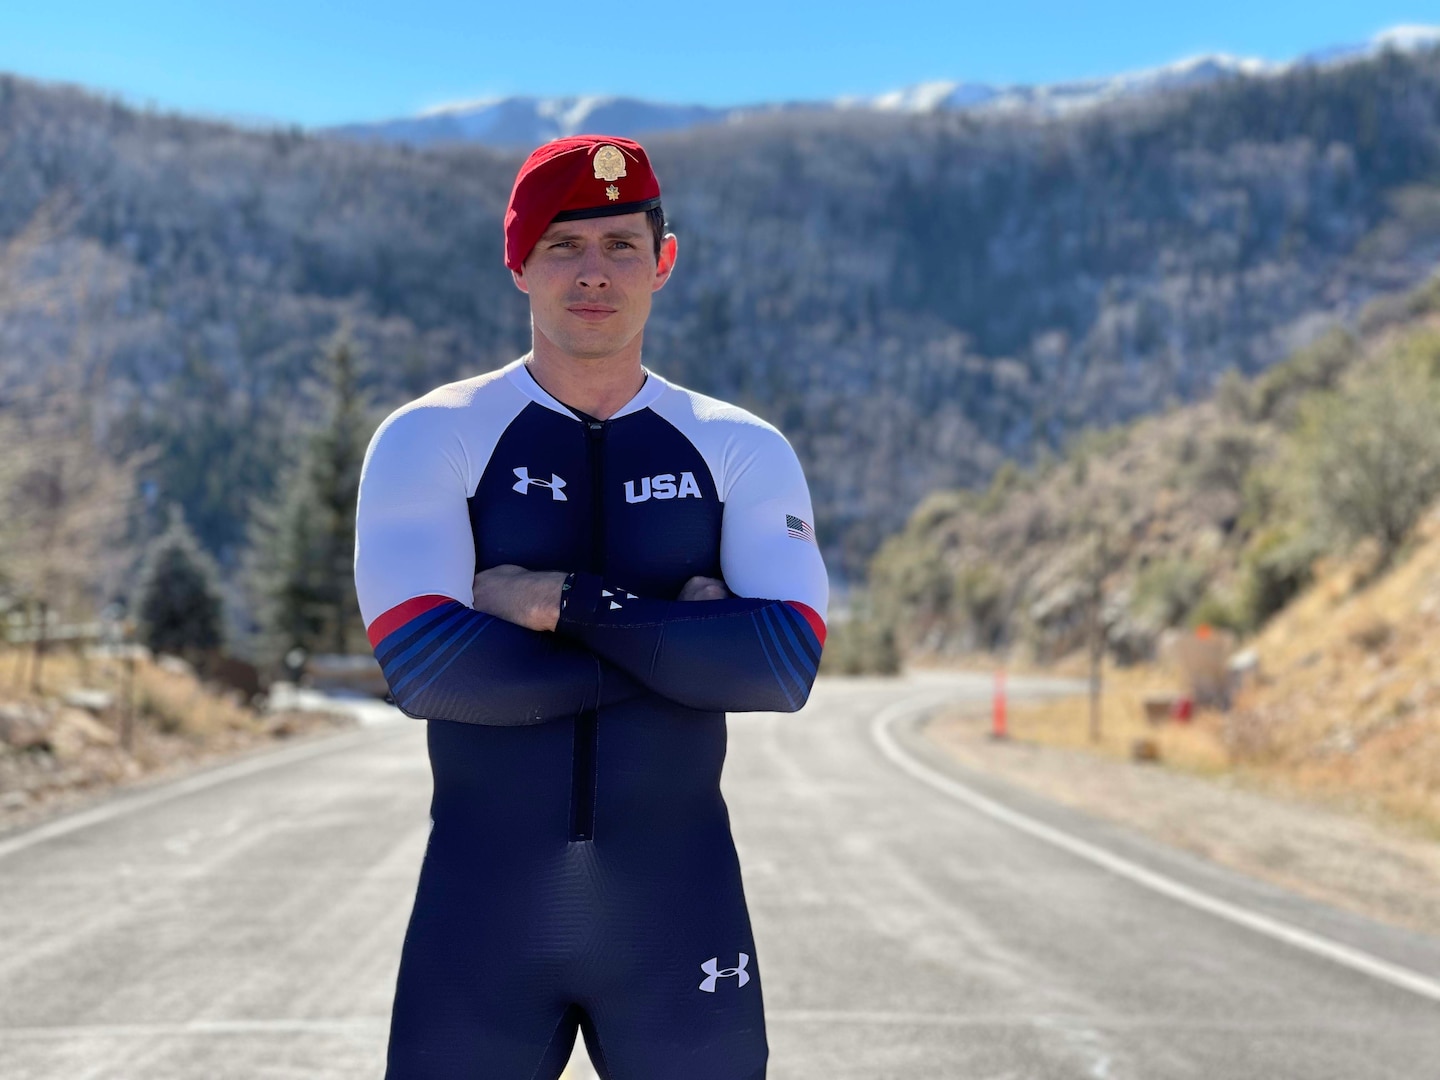 Athlete poses for a portrait in Team USA attire with mountainous background